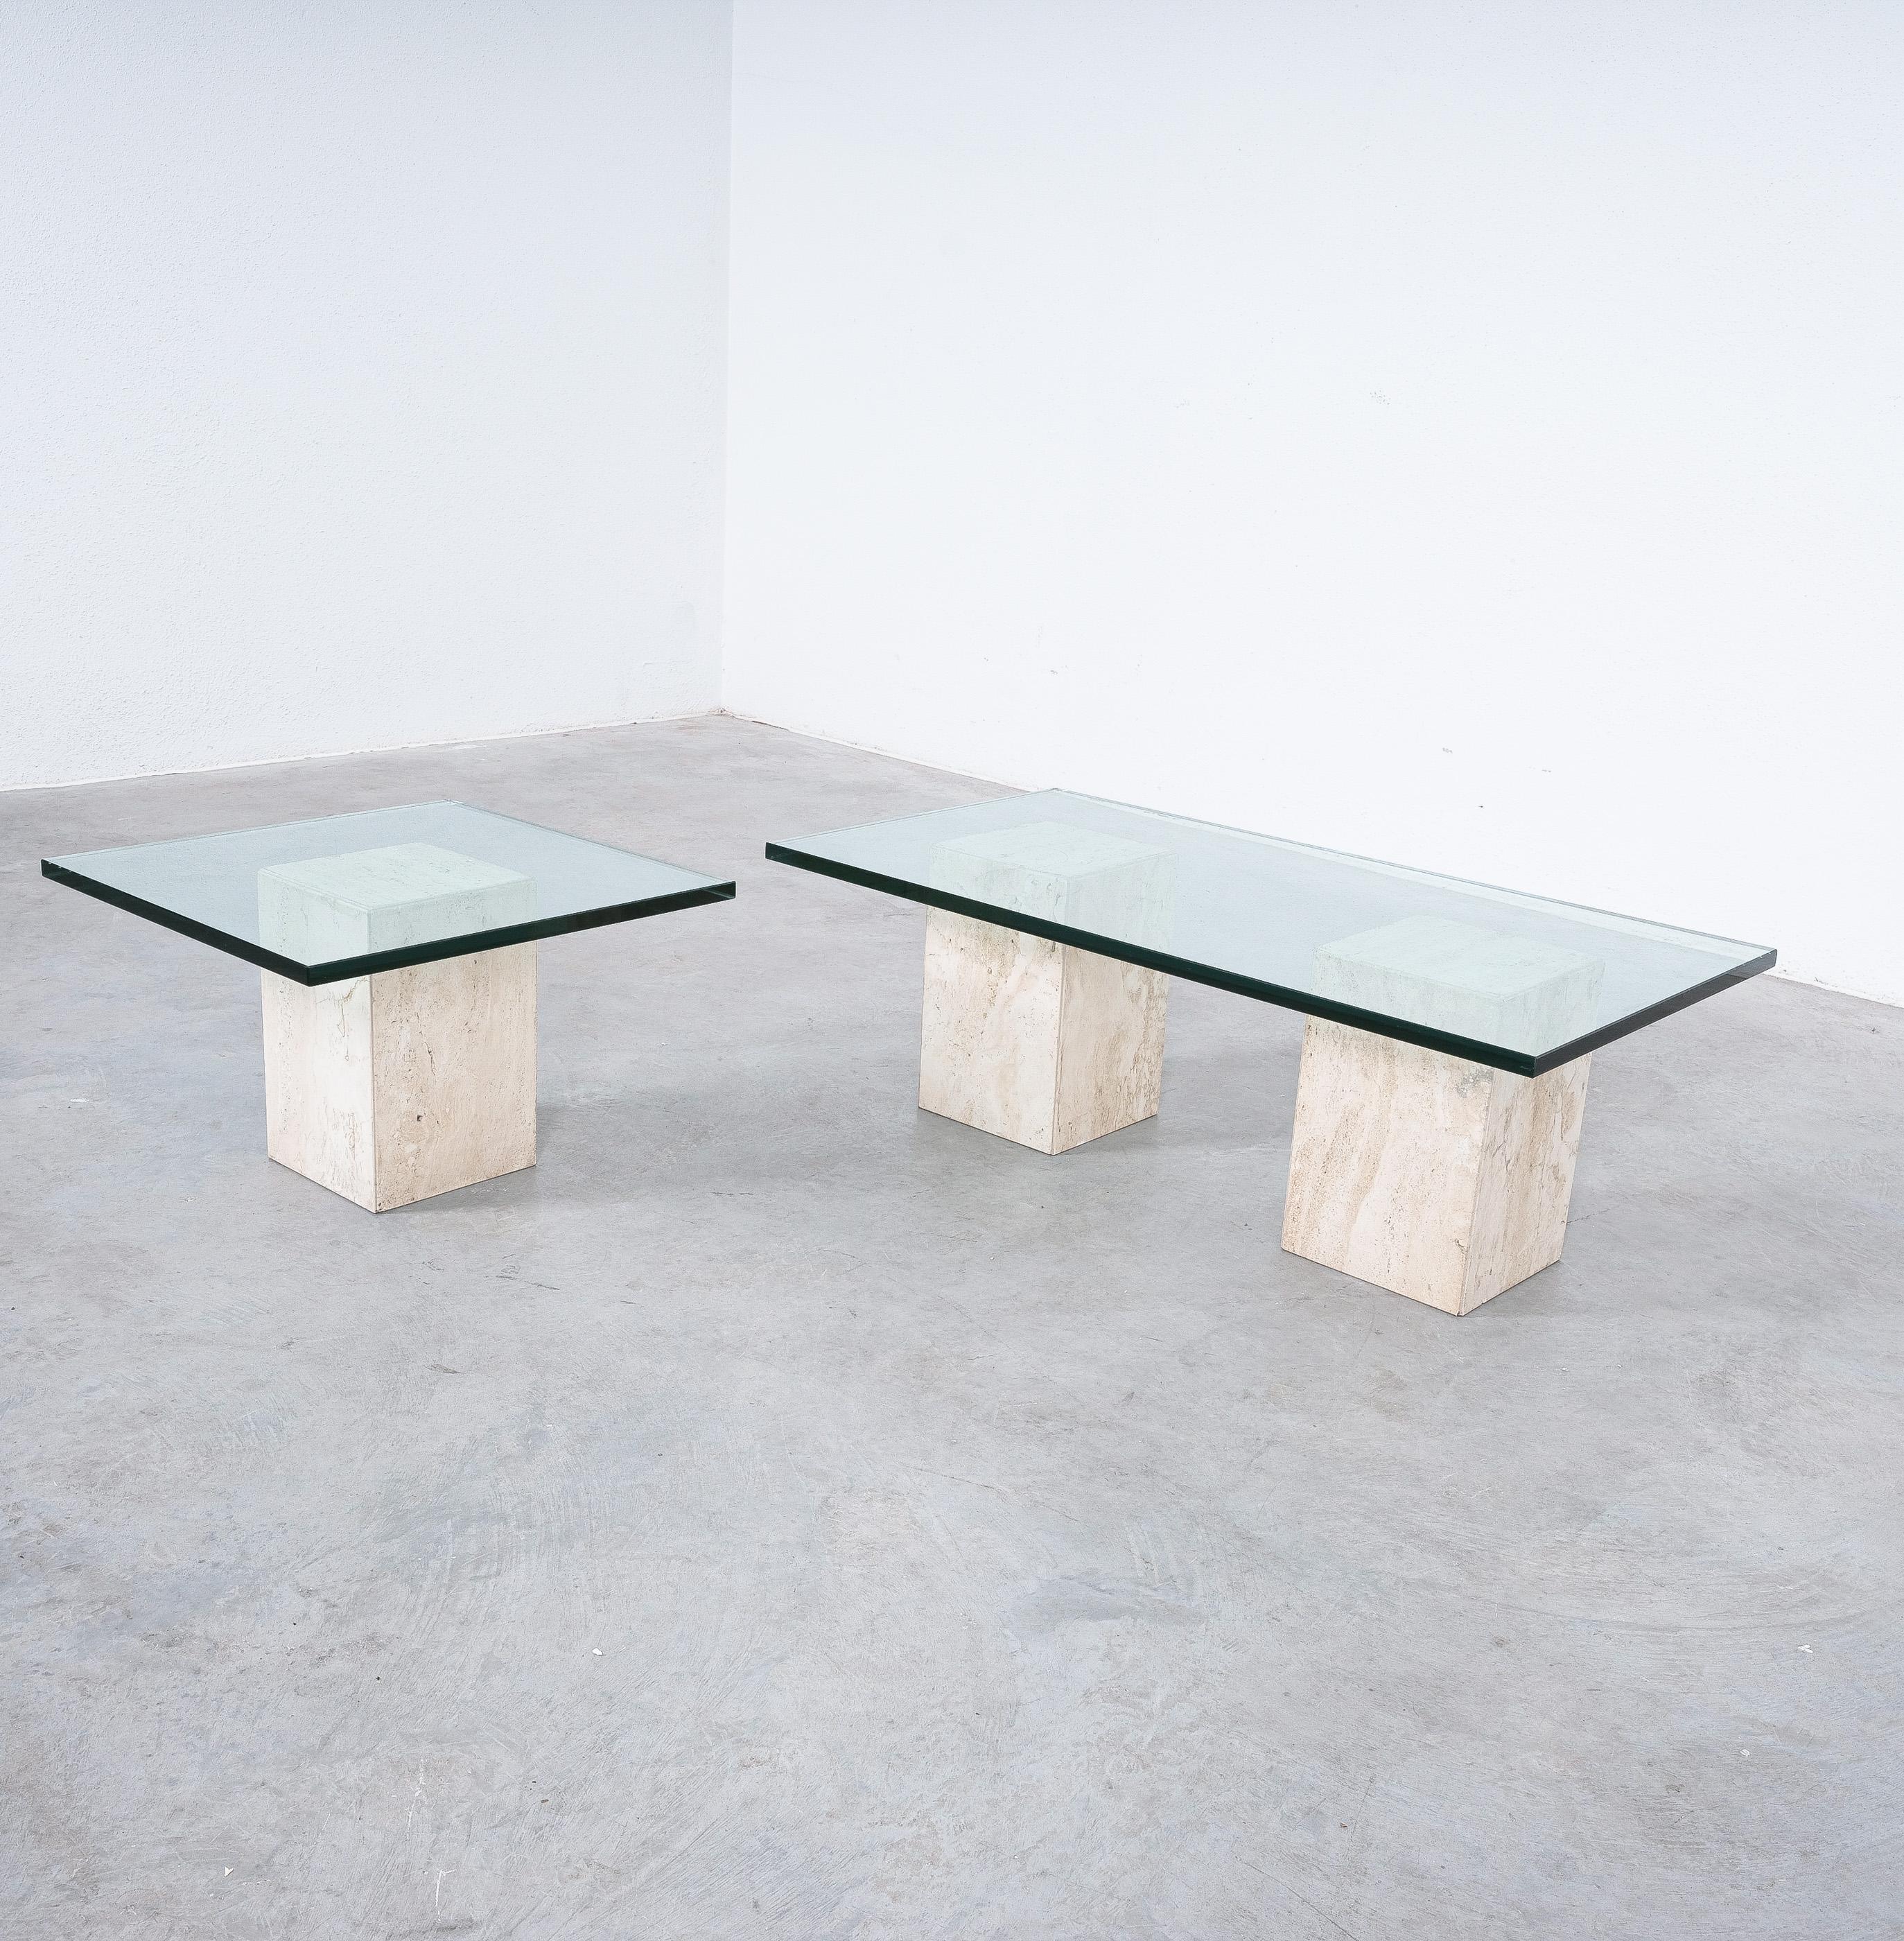 Travertine Tables from Three Blocks with Glass Tops, Italy, circa 1970 For Sale 6